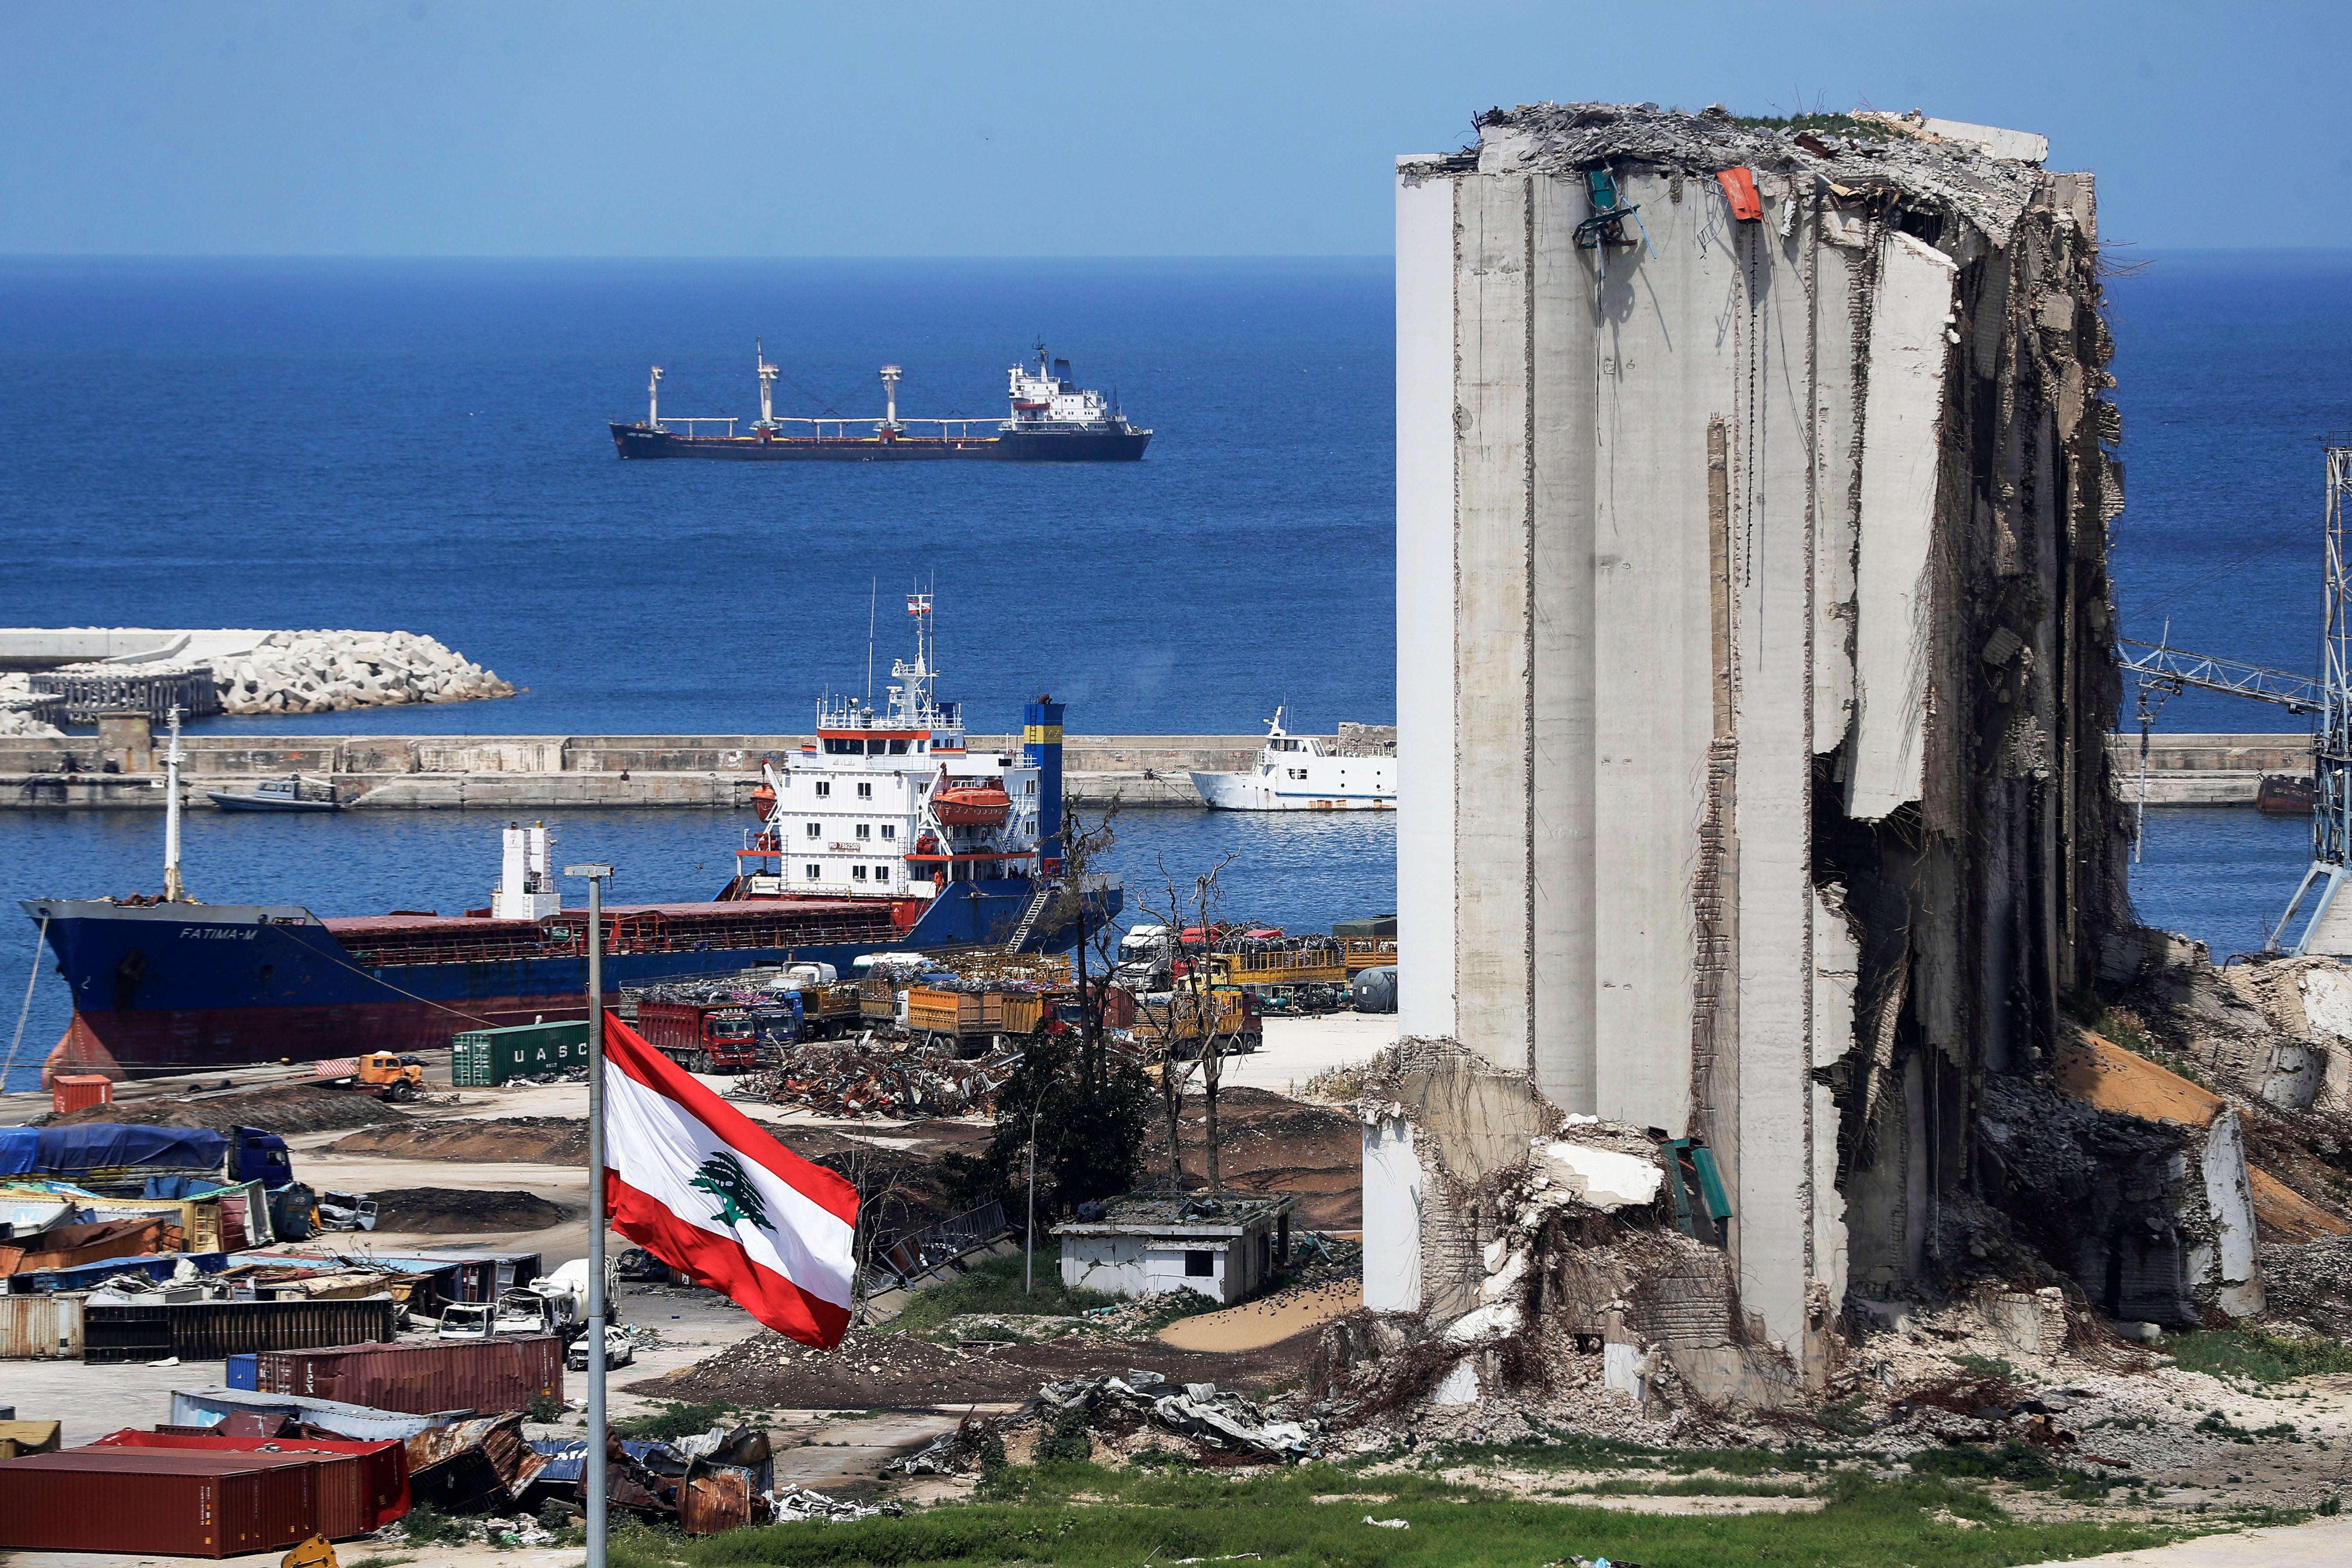 A view of the damaged grain silos at the port of Beirut